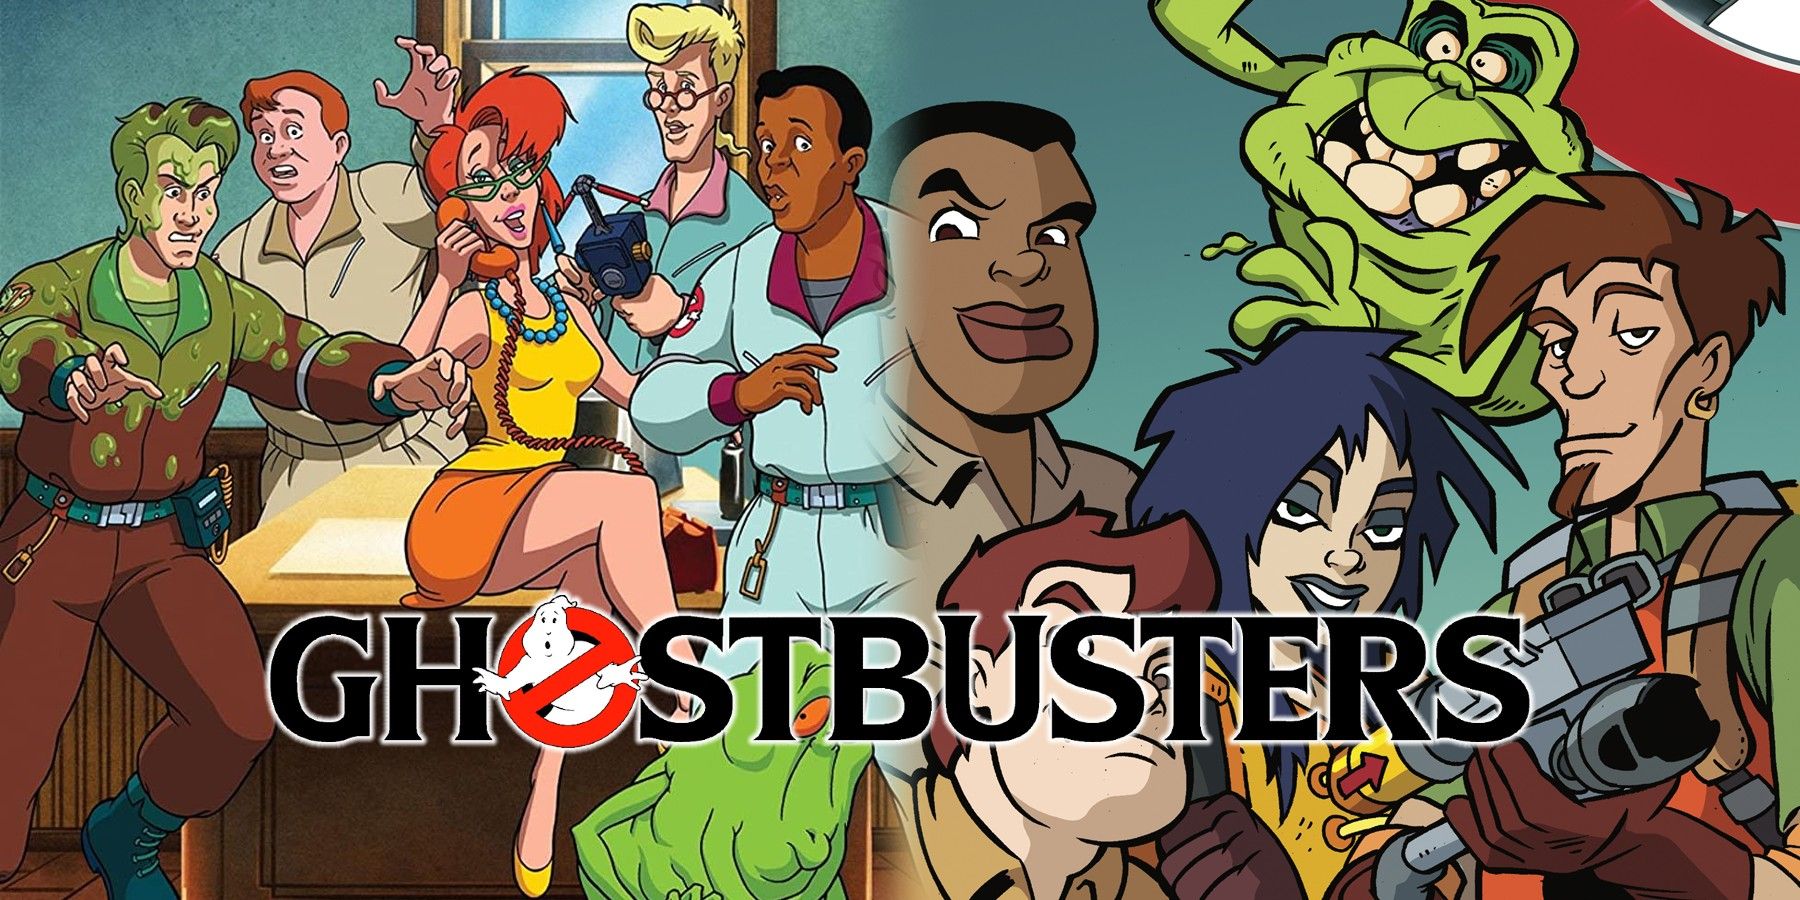 Ghostbusters Animated Series From Jason Reitman In The Works At Netflix